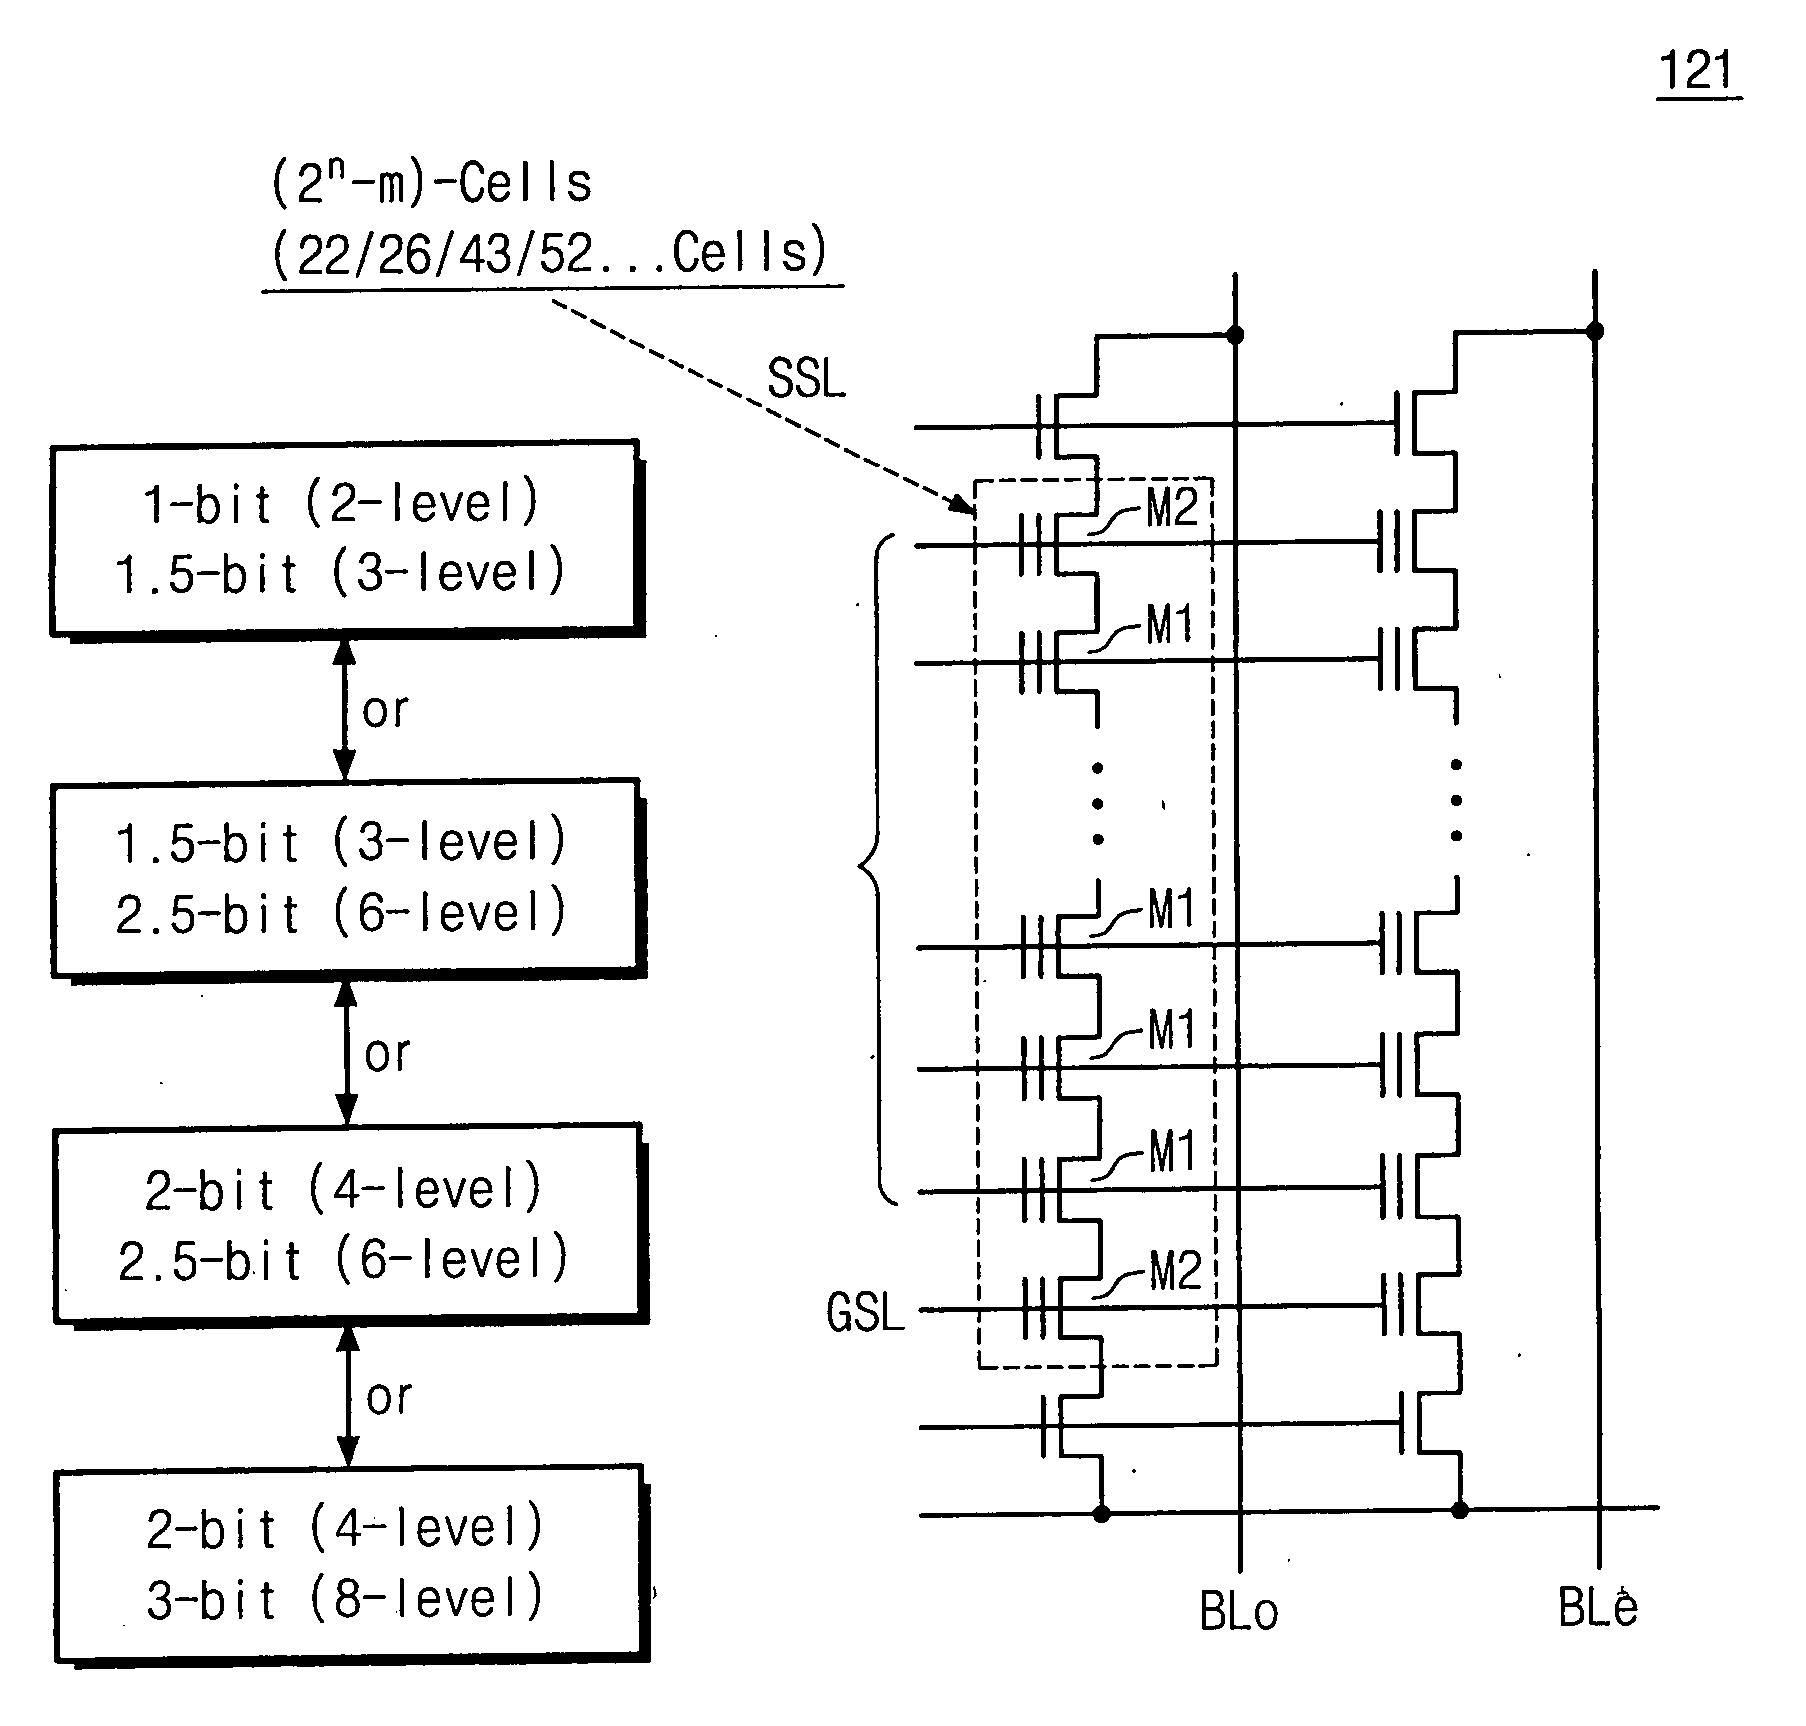 Multi-bit flash memory device including memory cells storing different numbers of bits